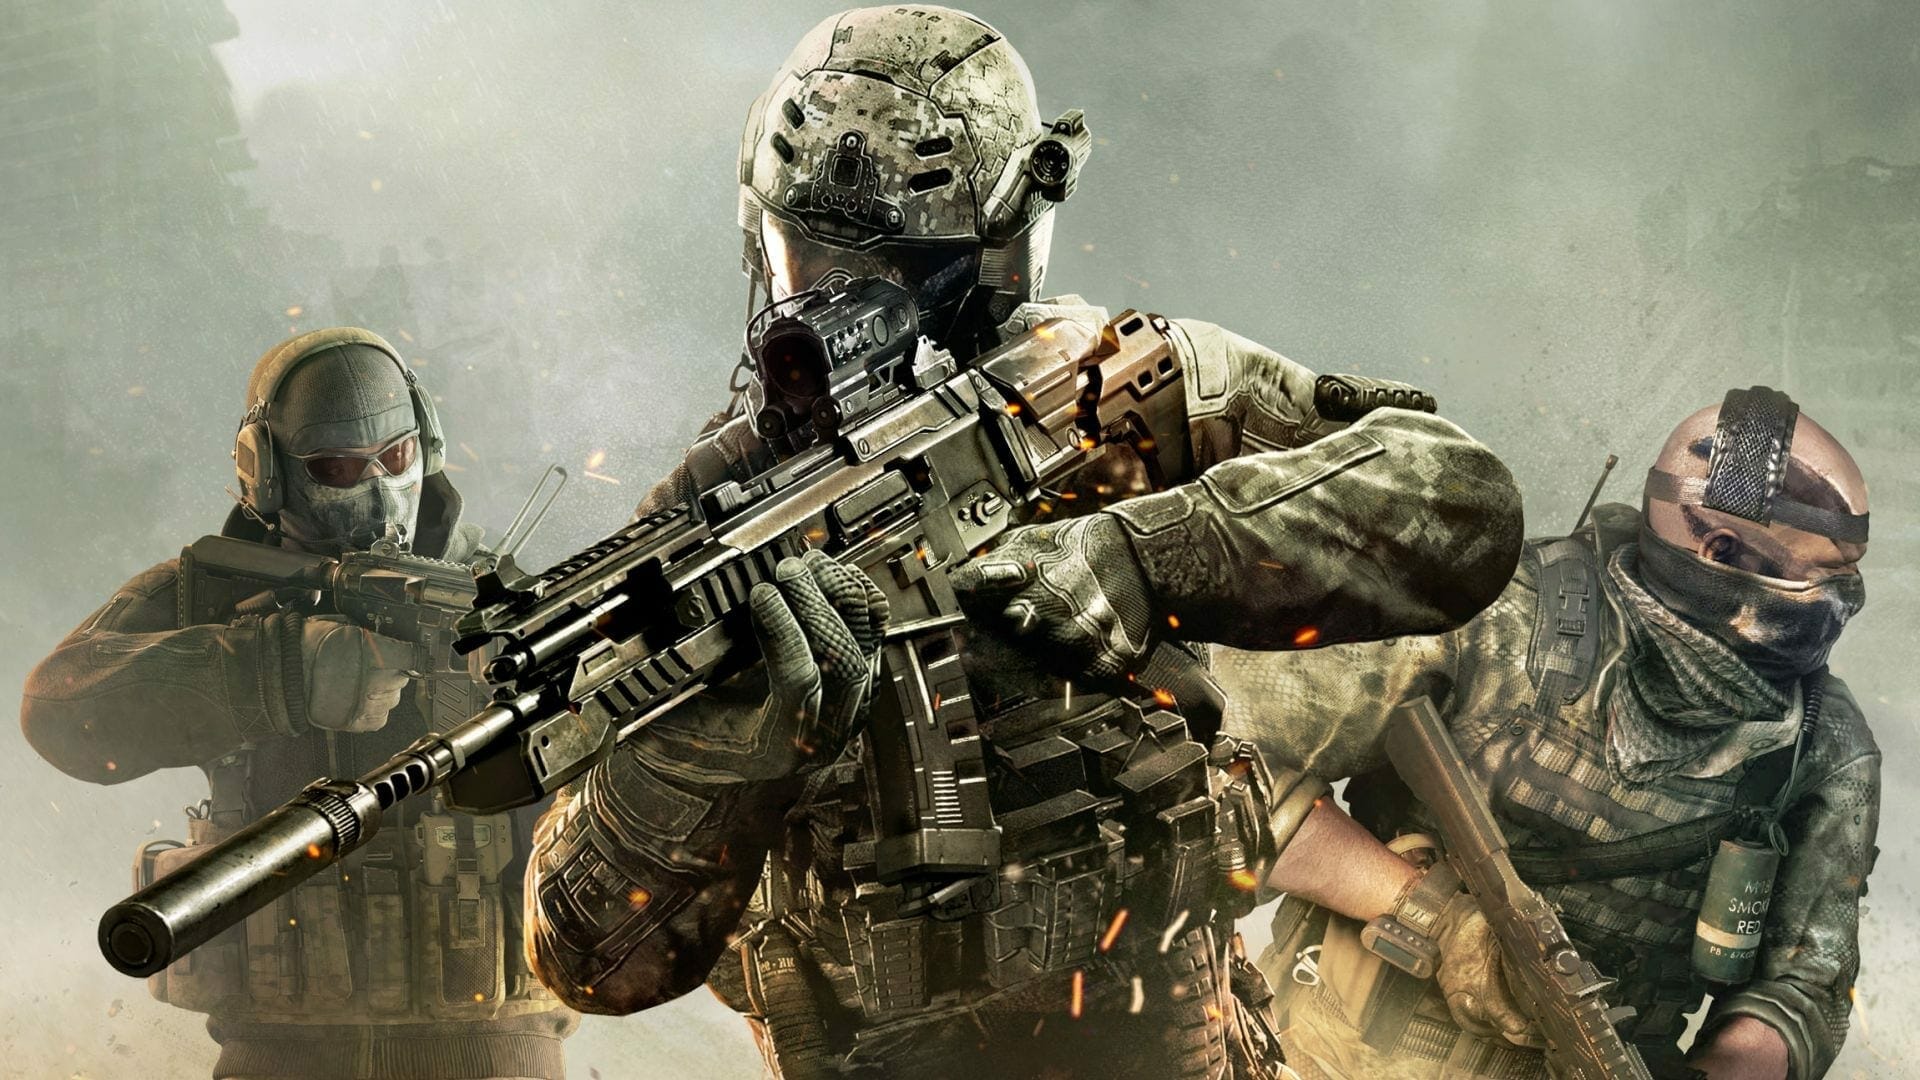 call of duty mobile apk 2021